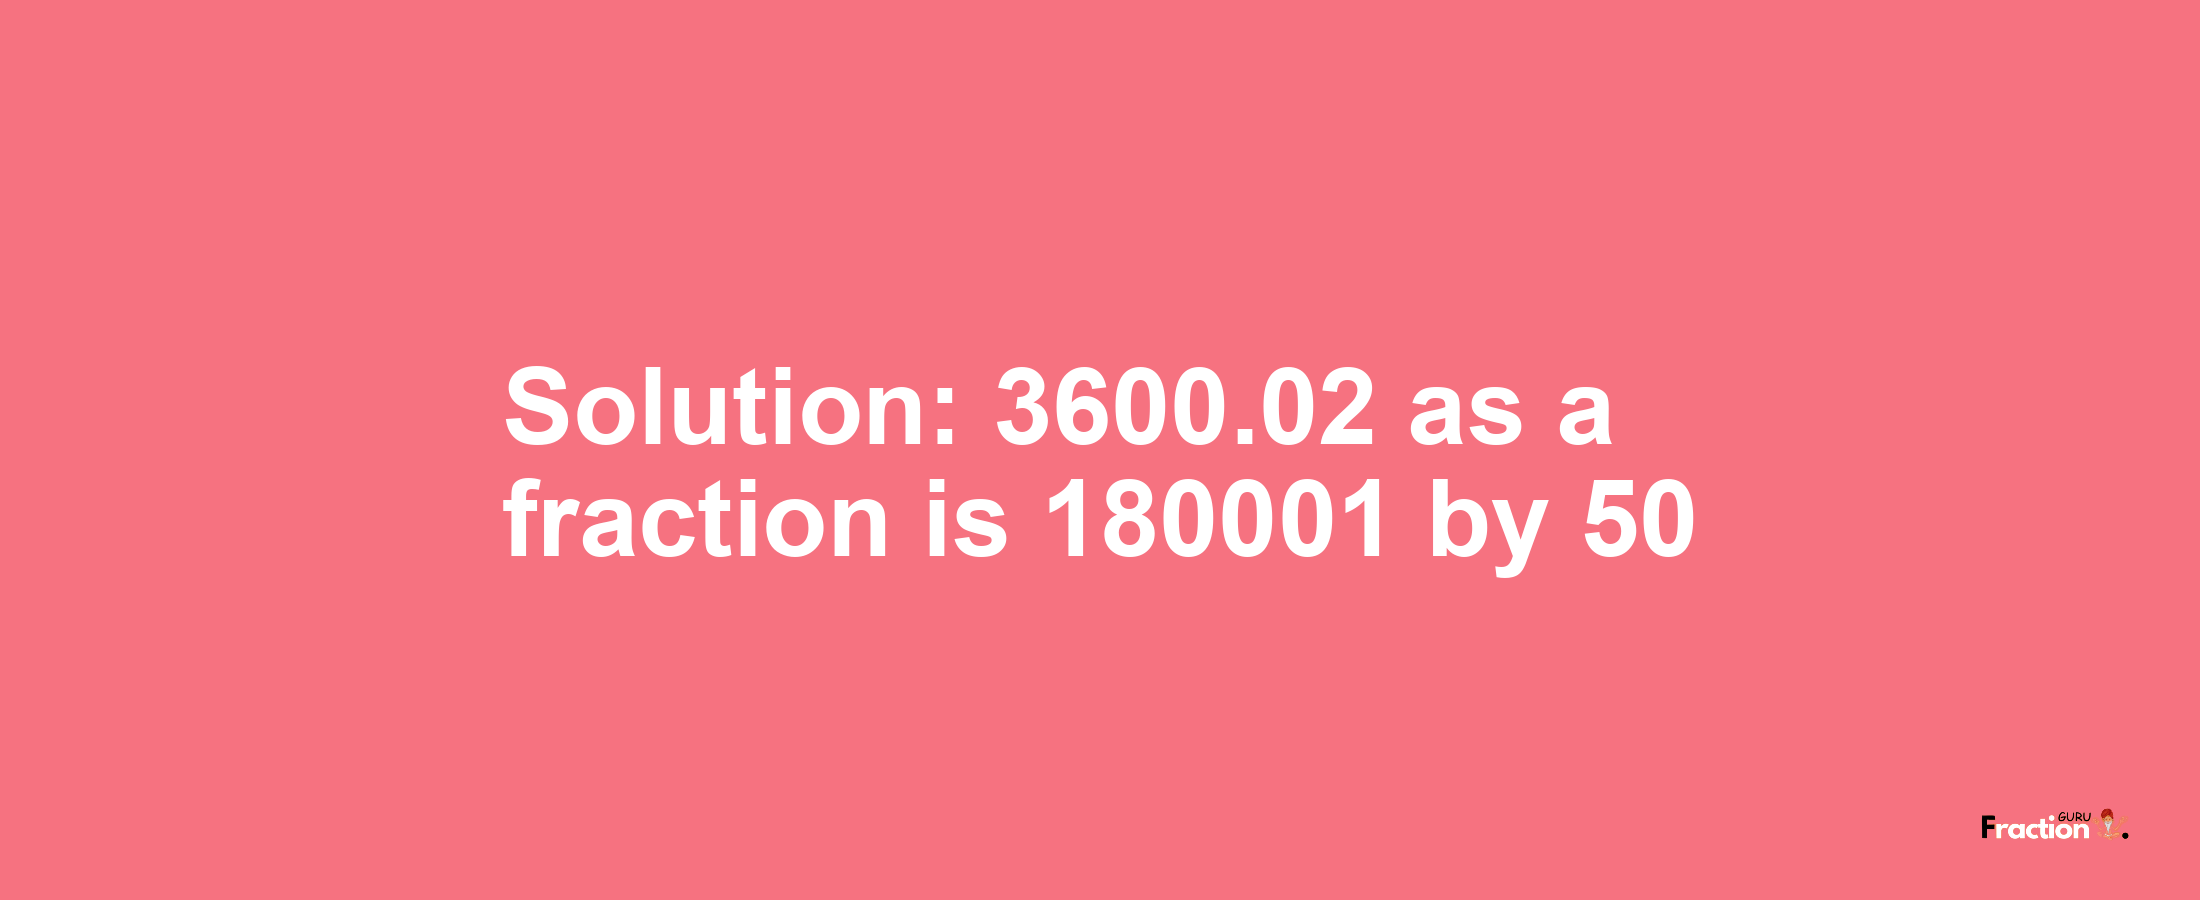 Solution:3600.02 as a fraction is 180001/50